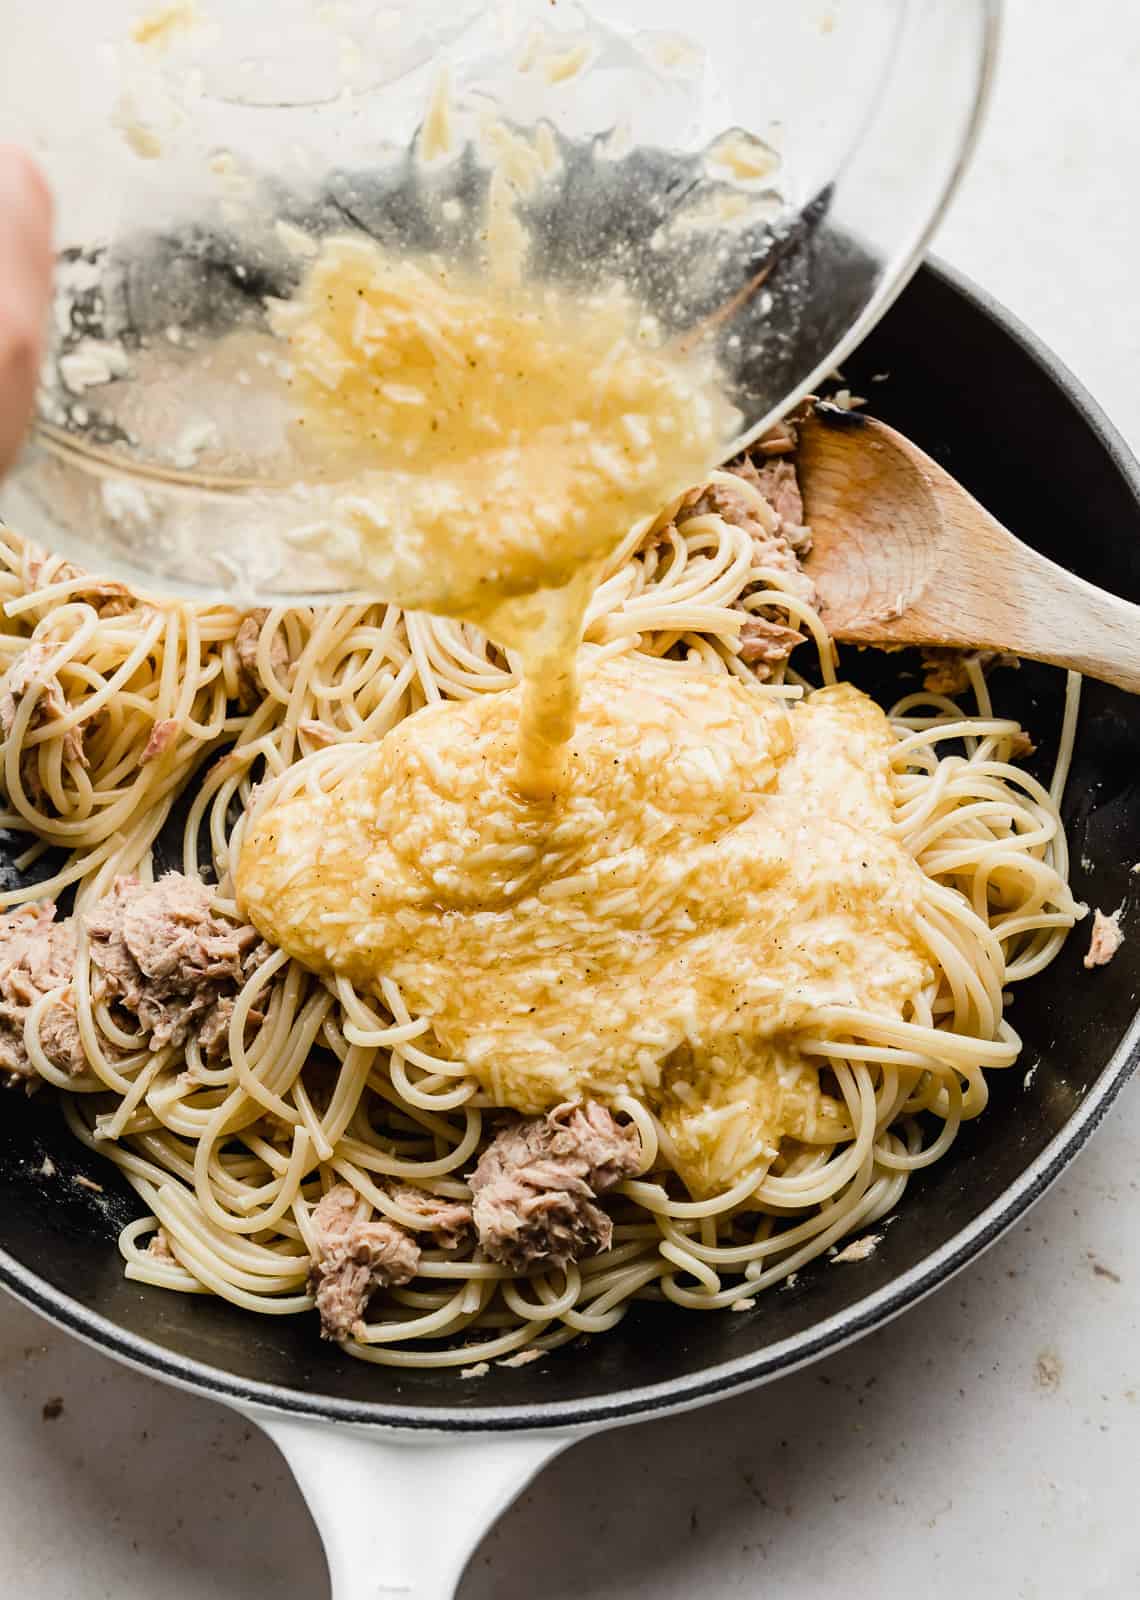 A yellow egg and cheese mixture being poured overtop of spaghetti noodles and tuna. 